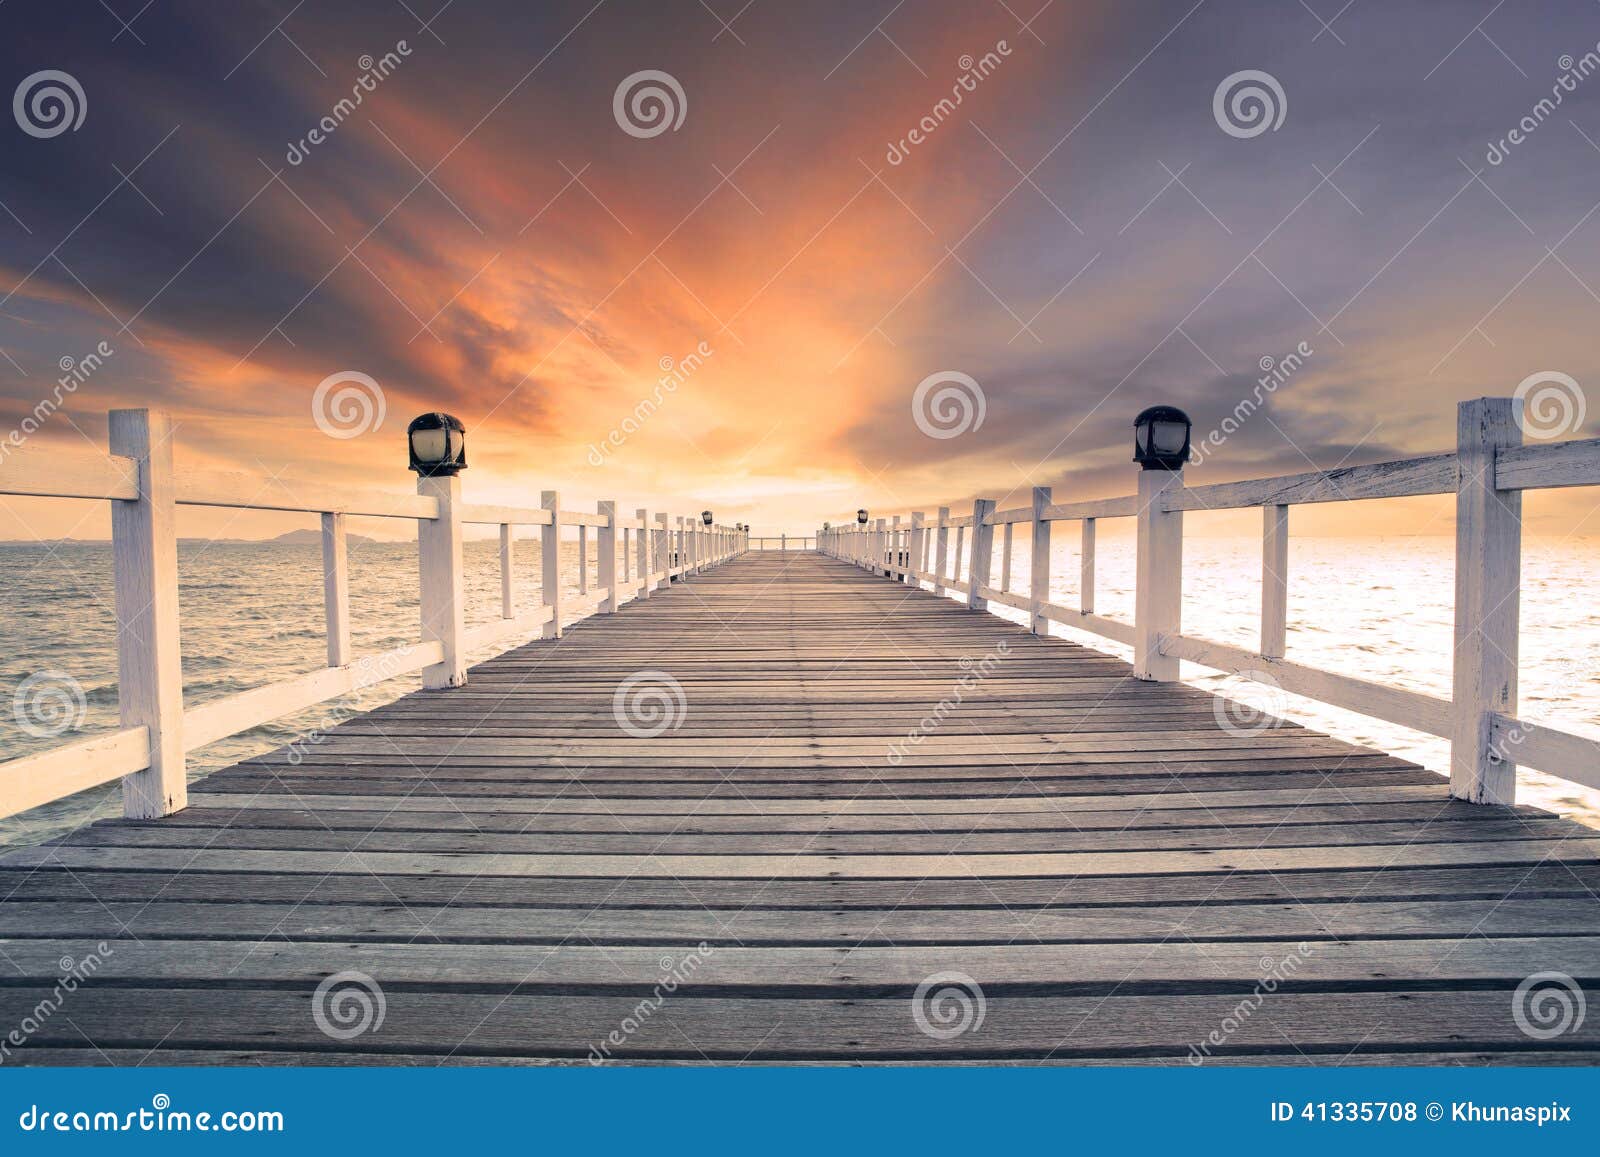 old wood bridg pier with nobody against beautiful dusky sky use